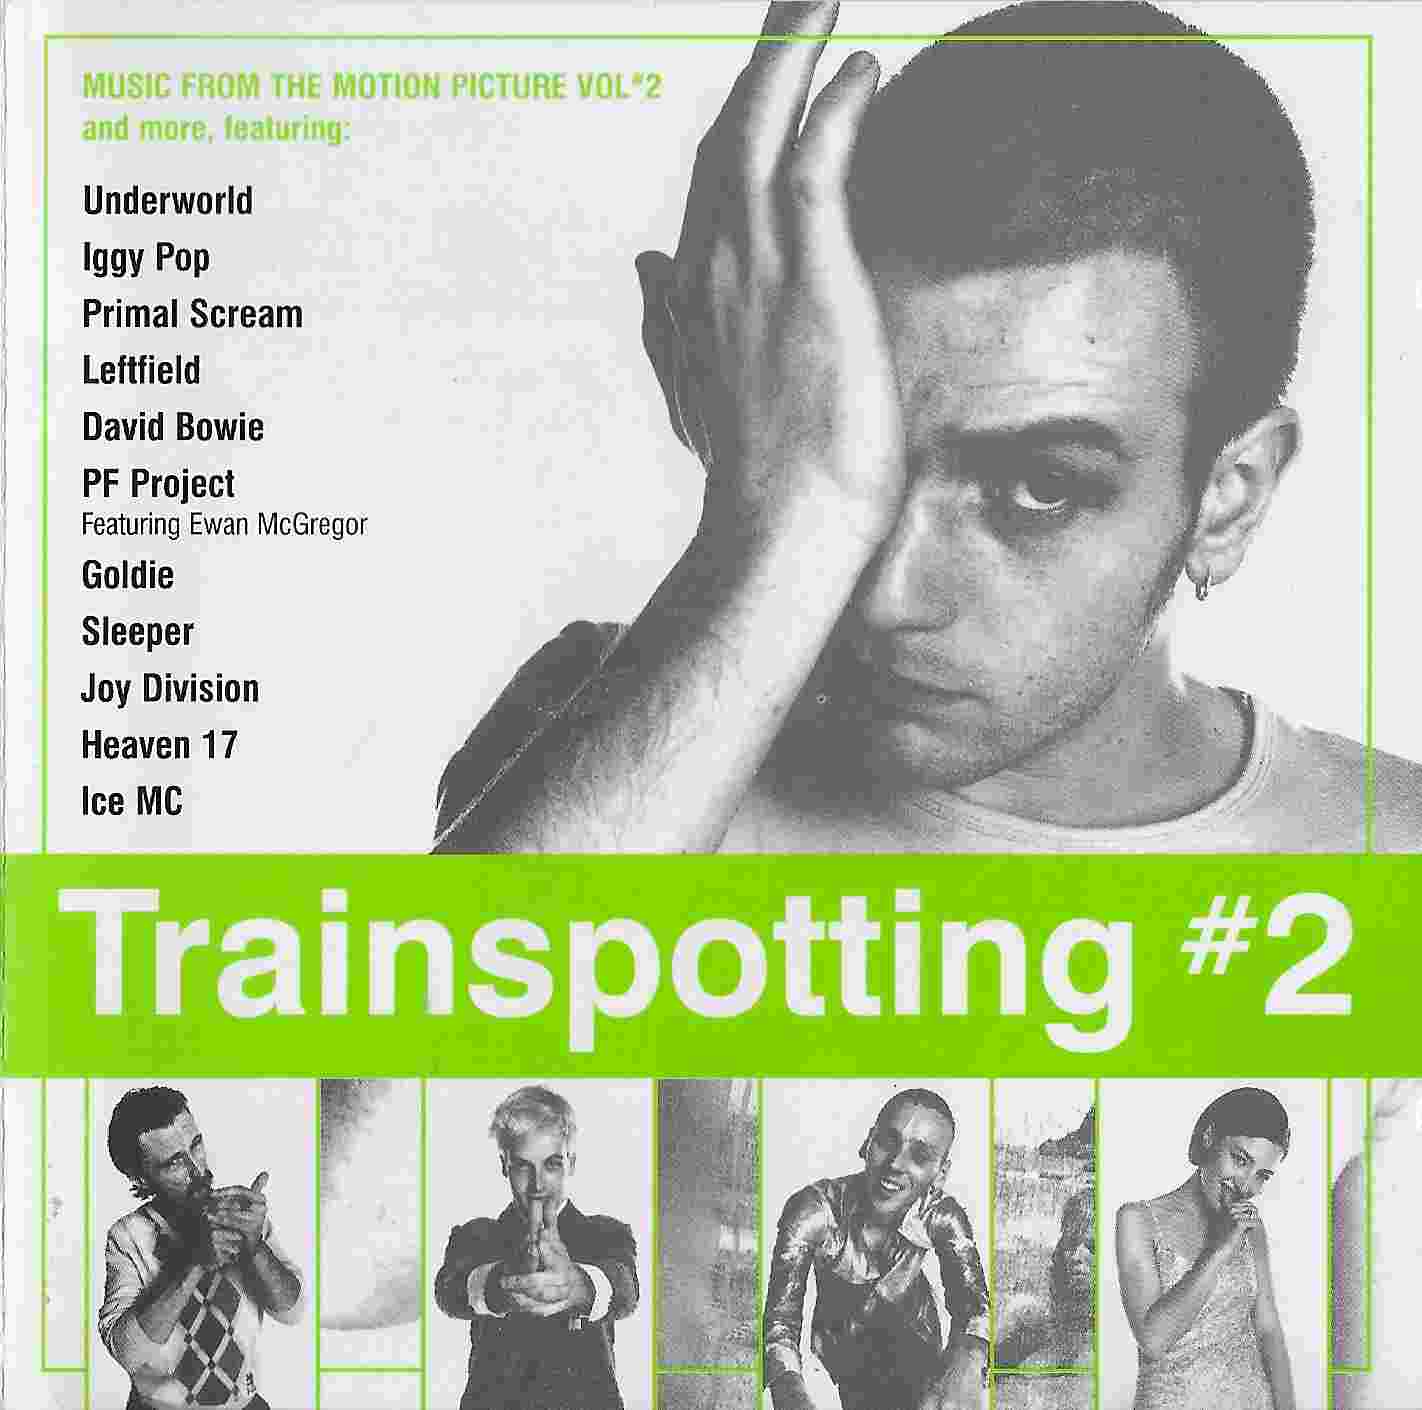 Picture of Trainspotting #2 by artist Various from ITV, Channel 4 and Channel 5 cds library